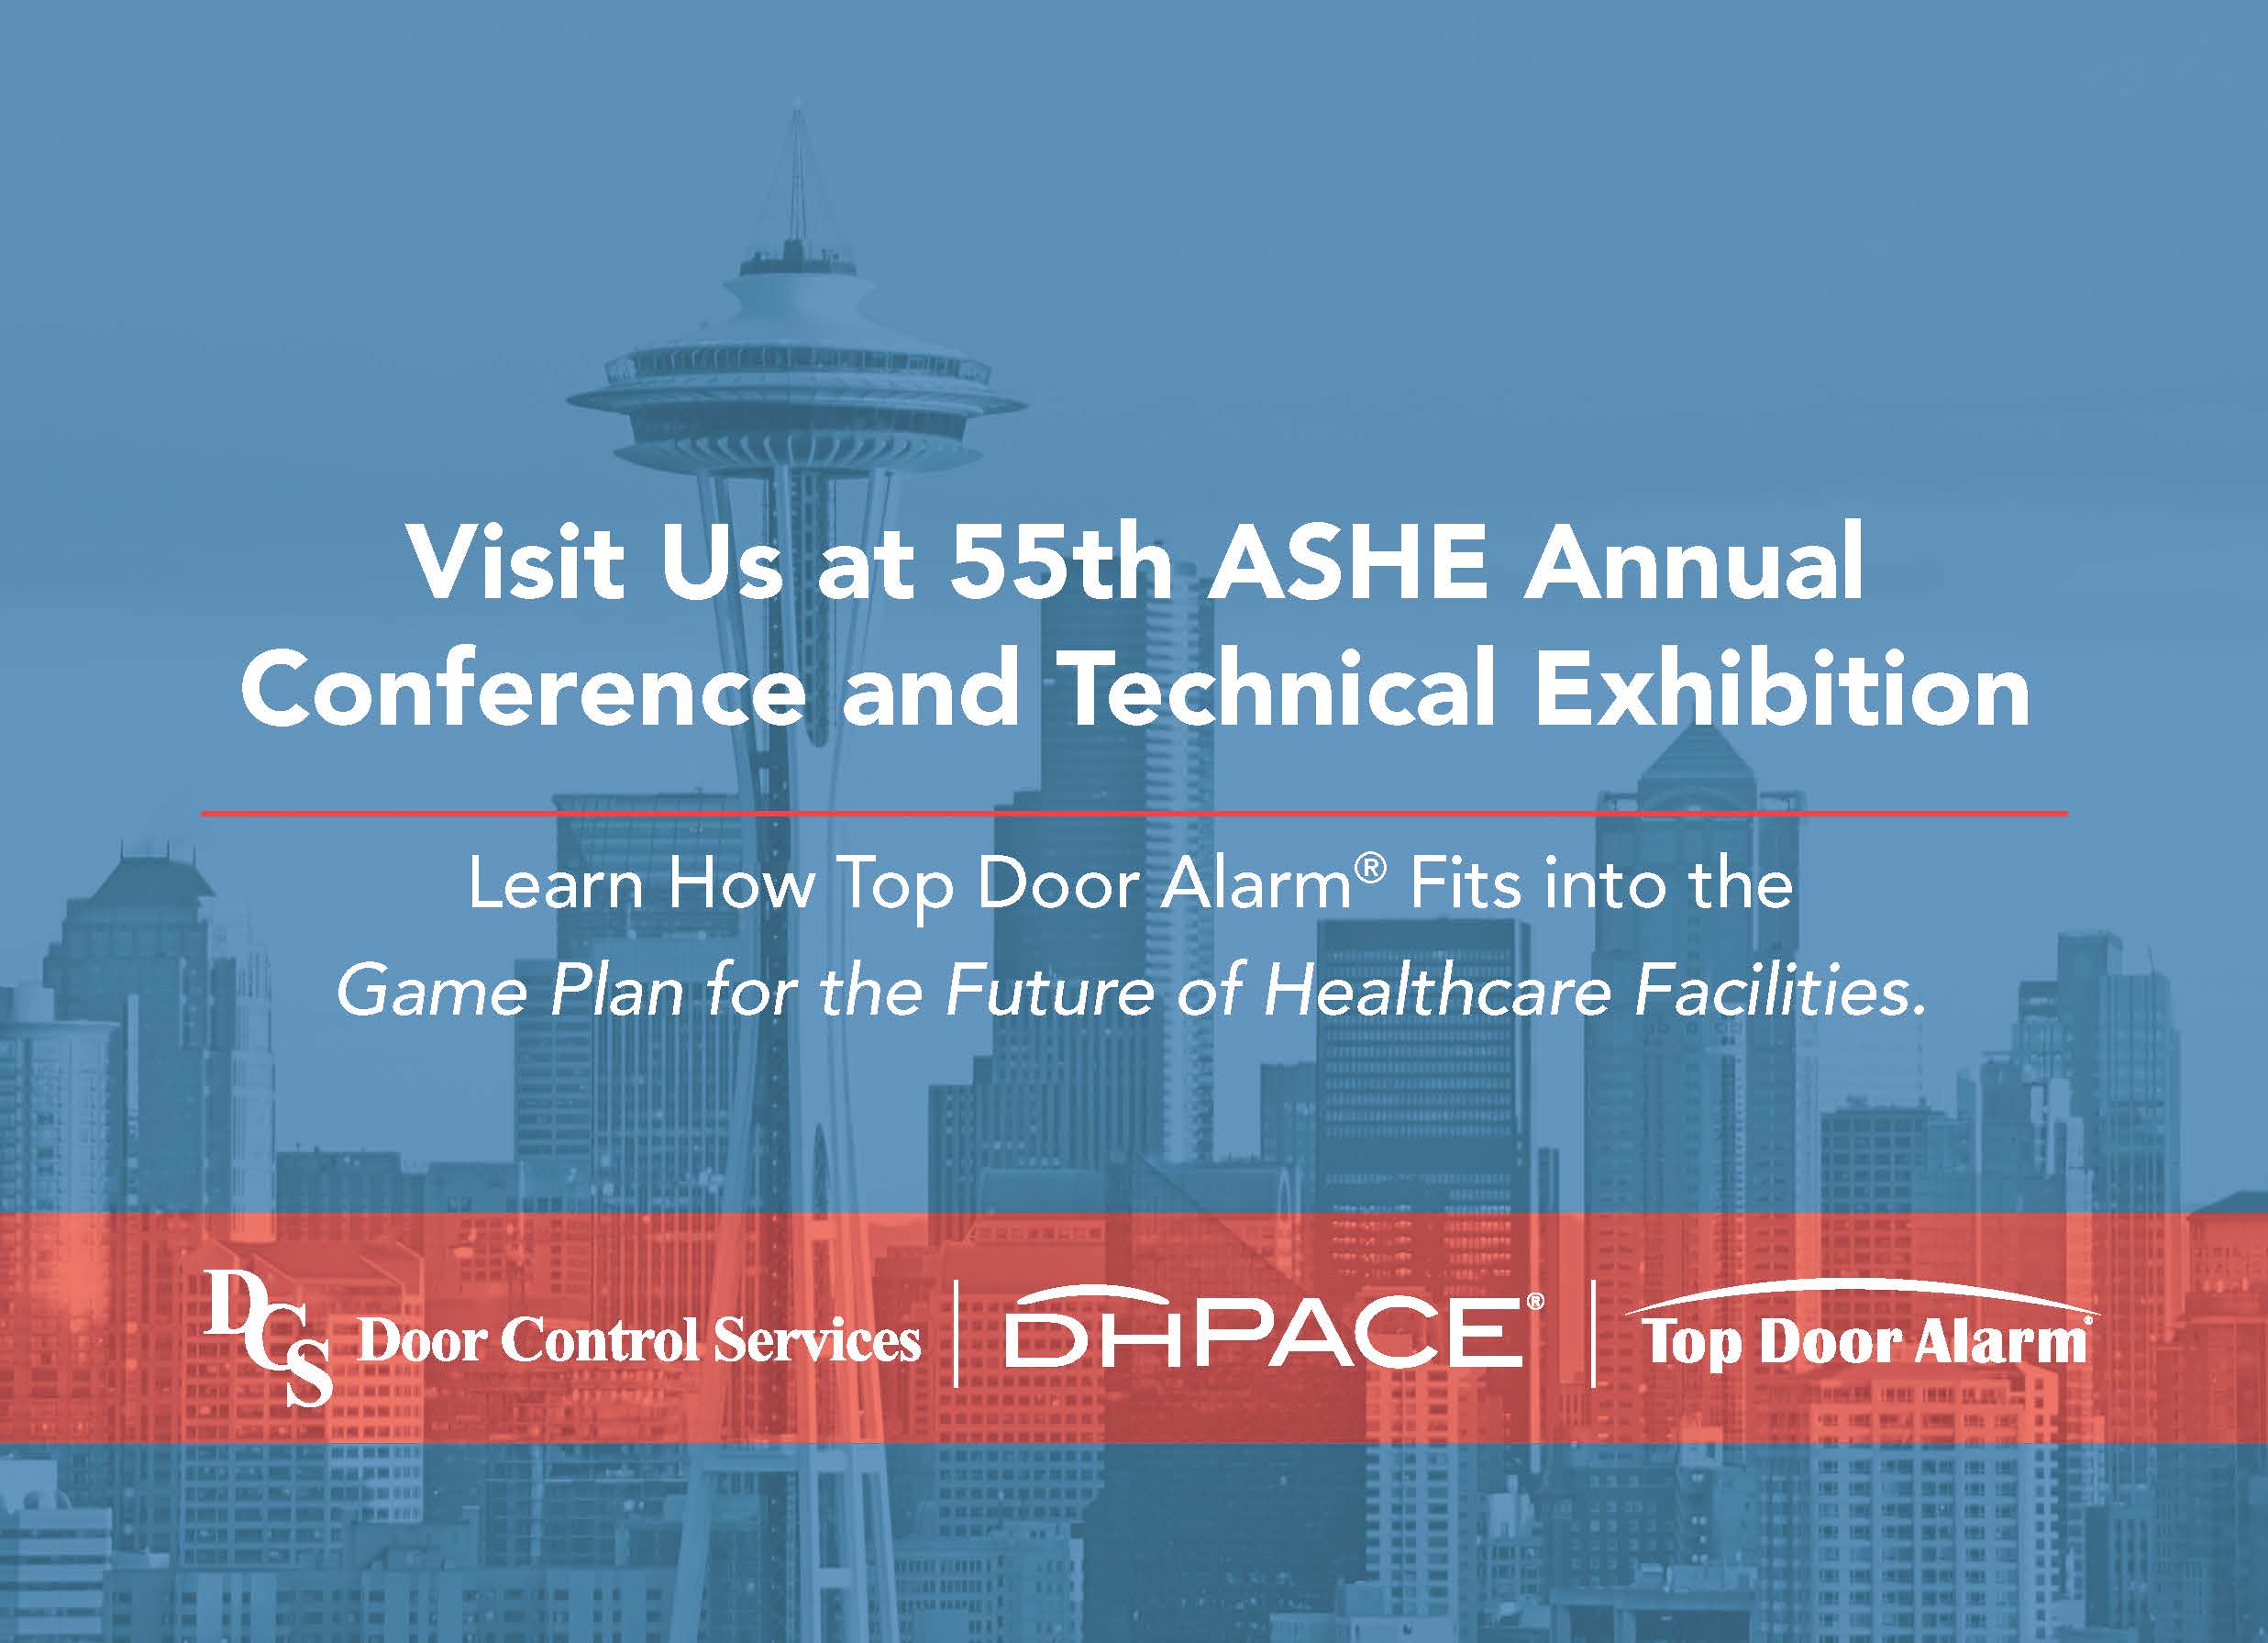 55th ASHE Annual Conference and Technical Exhibition